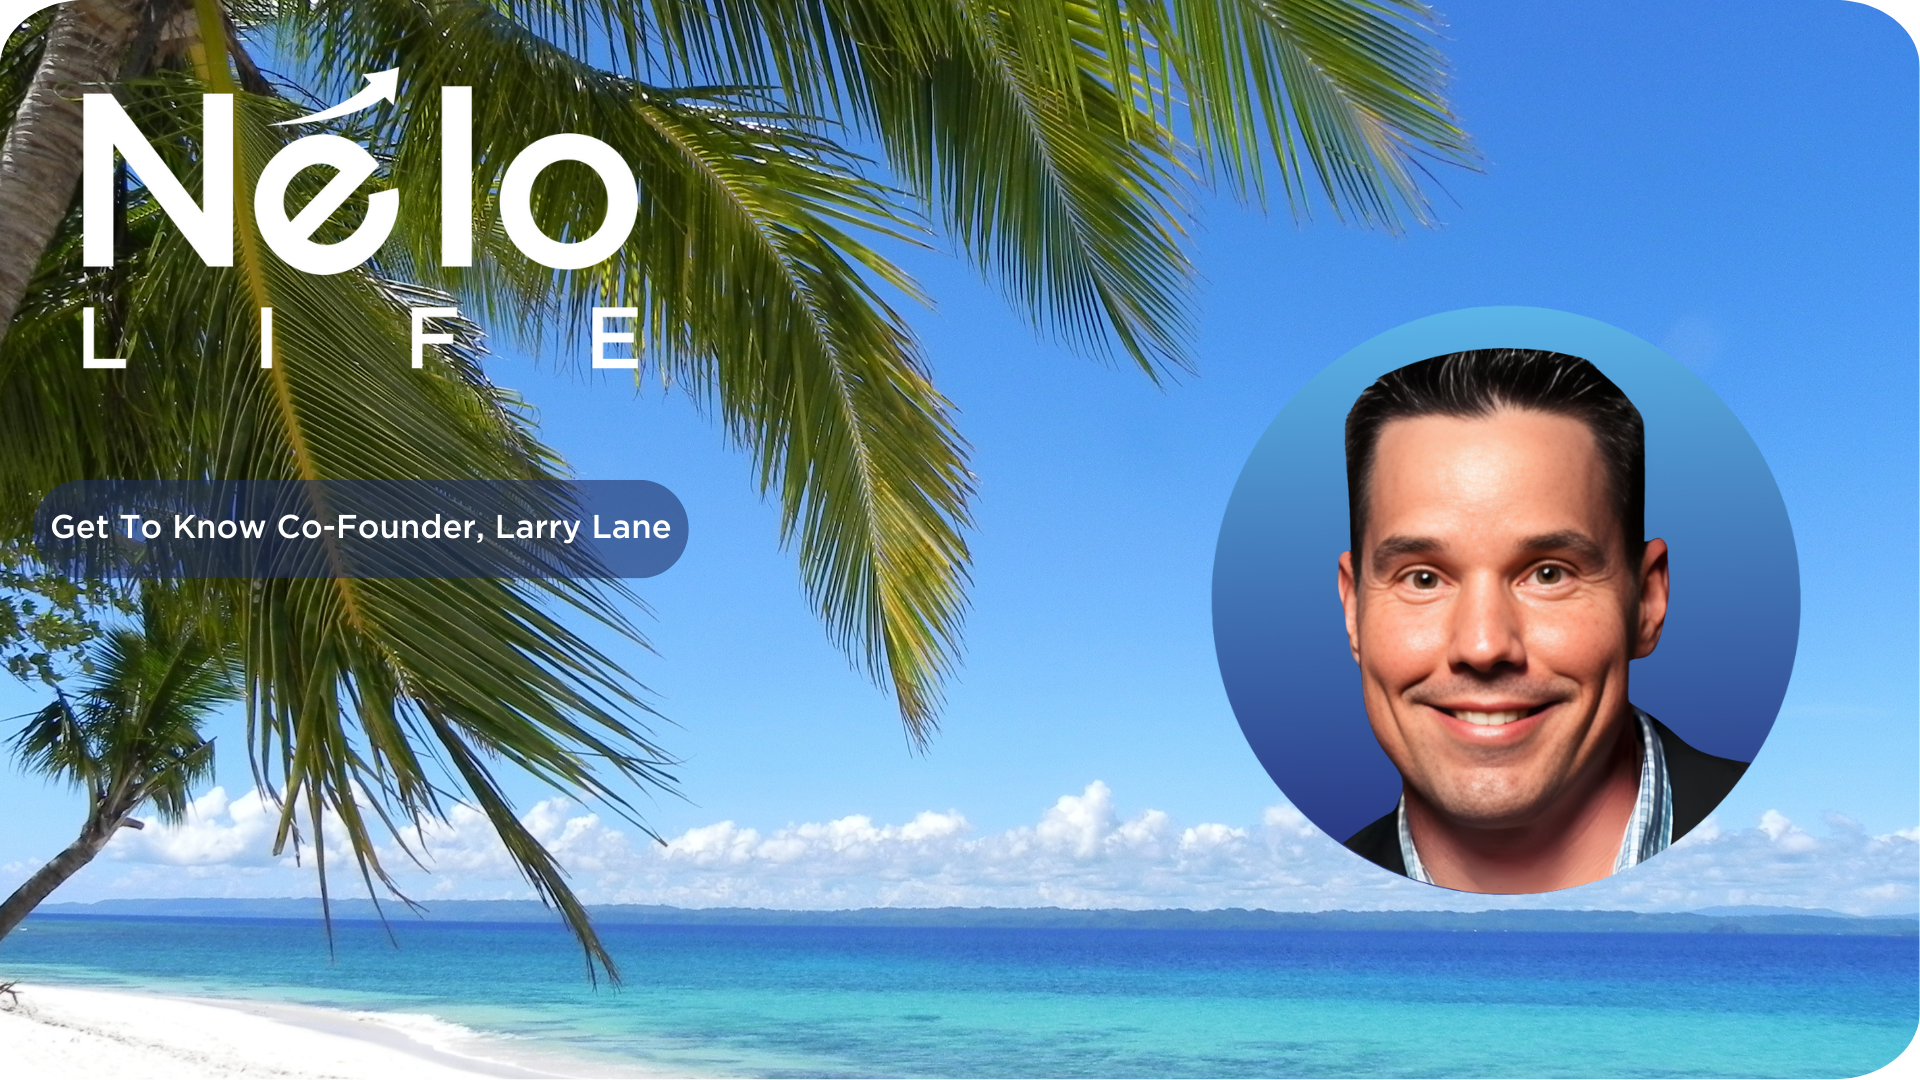 Get To Know Co-Founder, Larry Lane